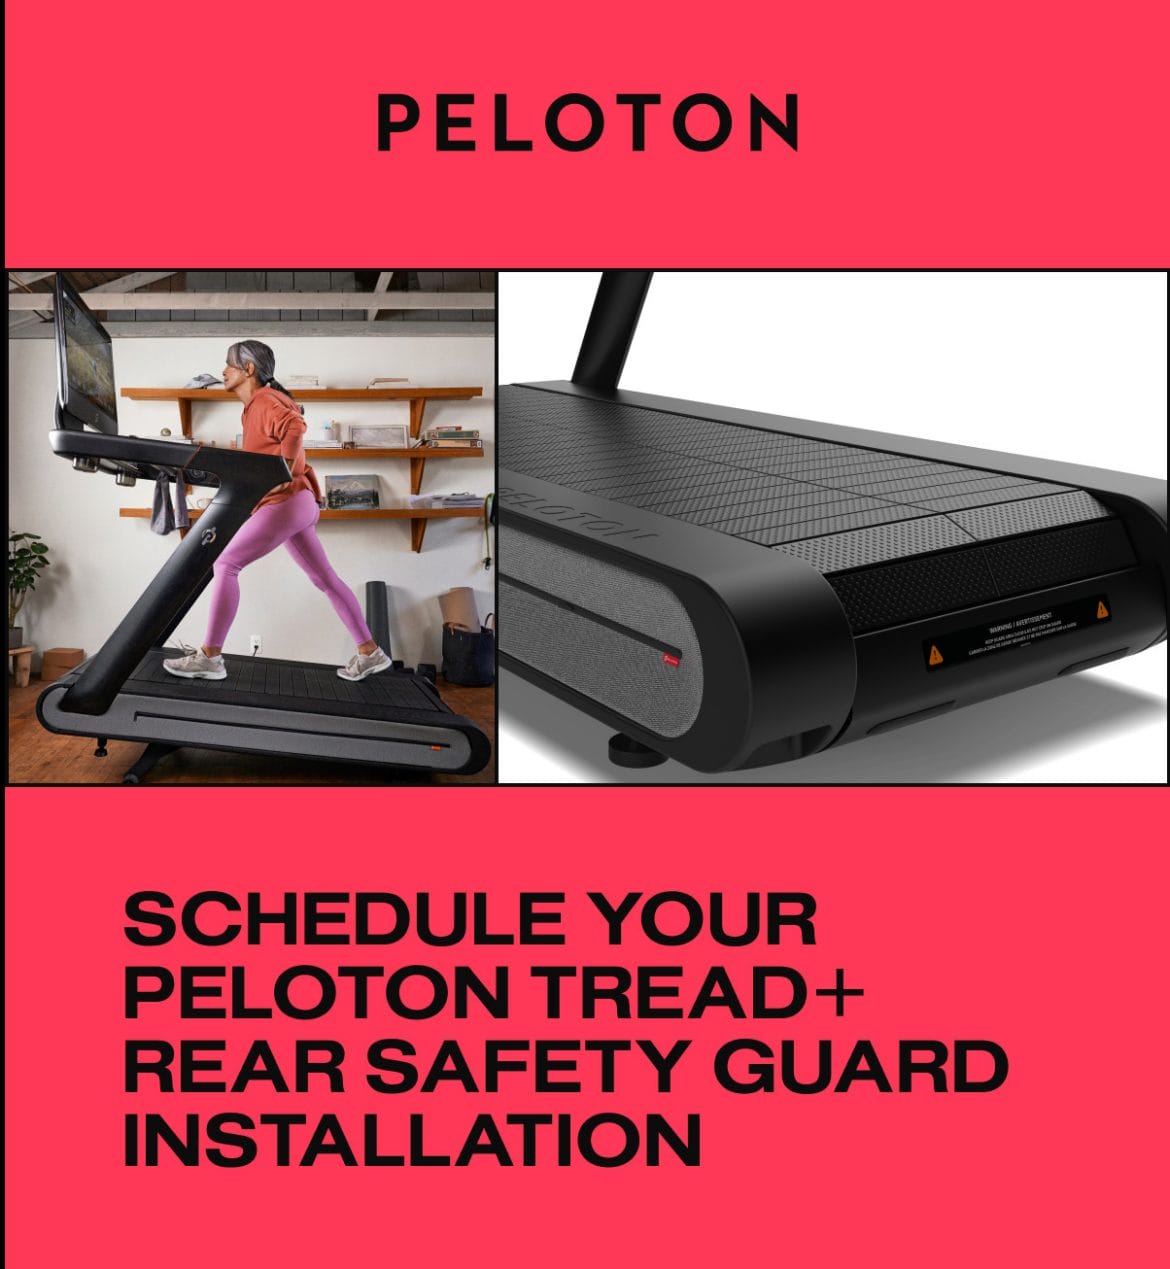 Email sent from Peloton to current Tread+ owners regarding rear guard installation.